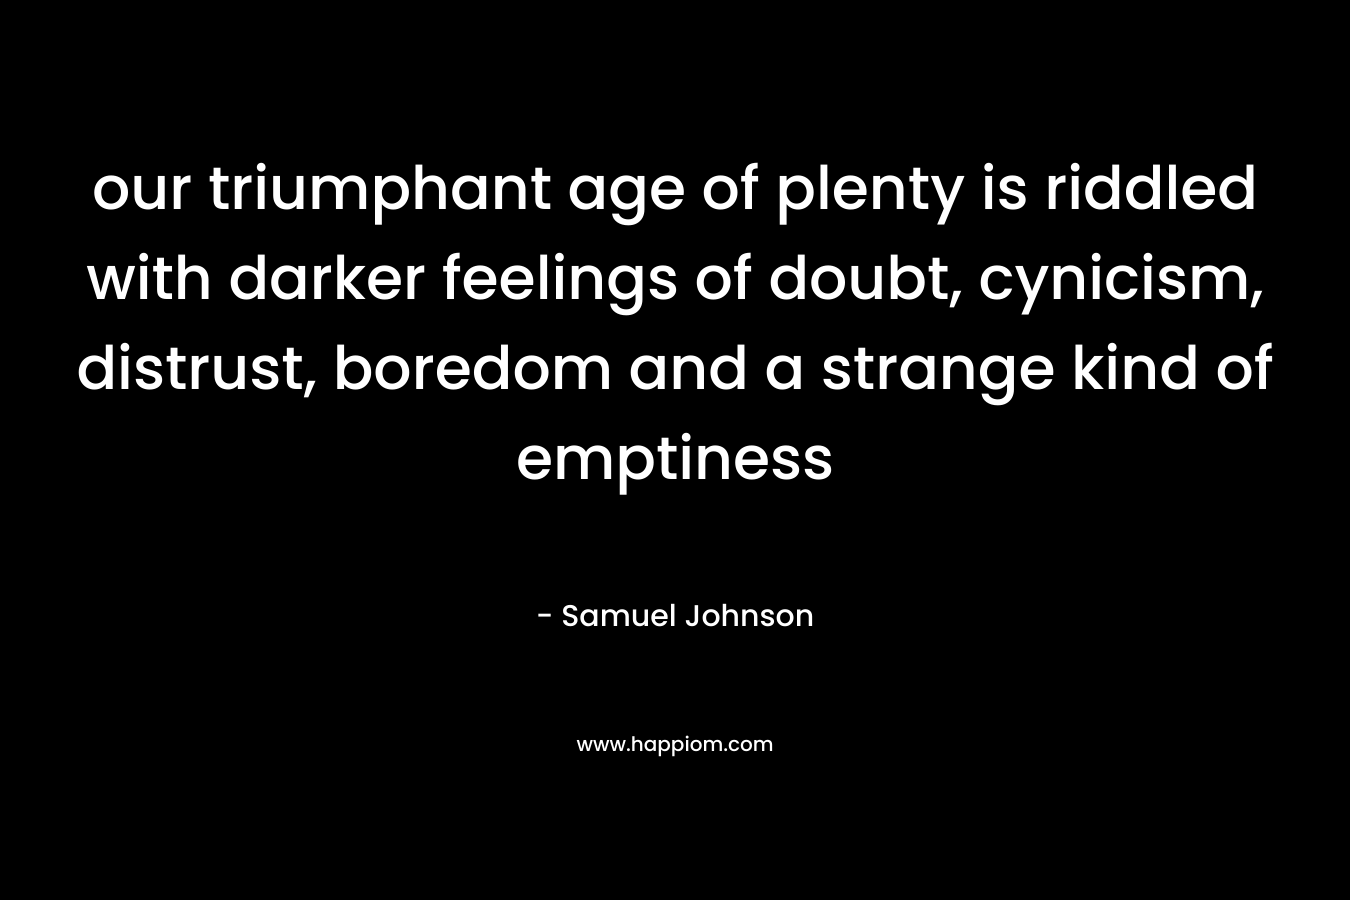 our triumphant age of plenty is riddled with darker feelings of doubt, cynicism, distrust, boredom and a strange kind of emptiness